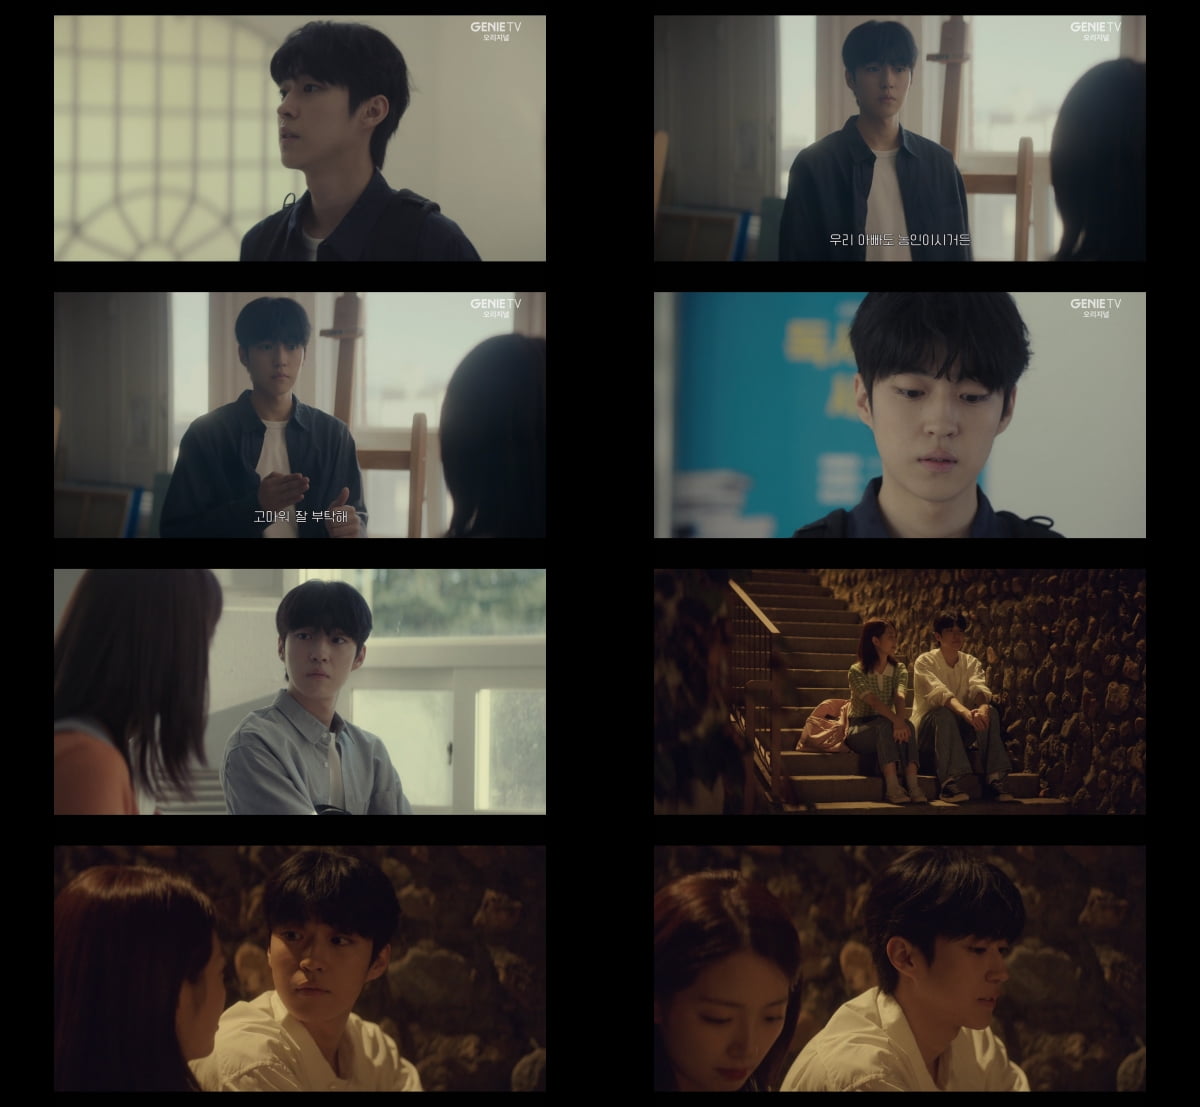 'Jung Woo-sung's child role' Baek Sung-cheol plays the hearing impaired person perfectly